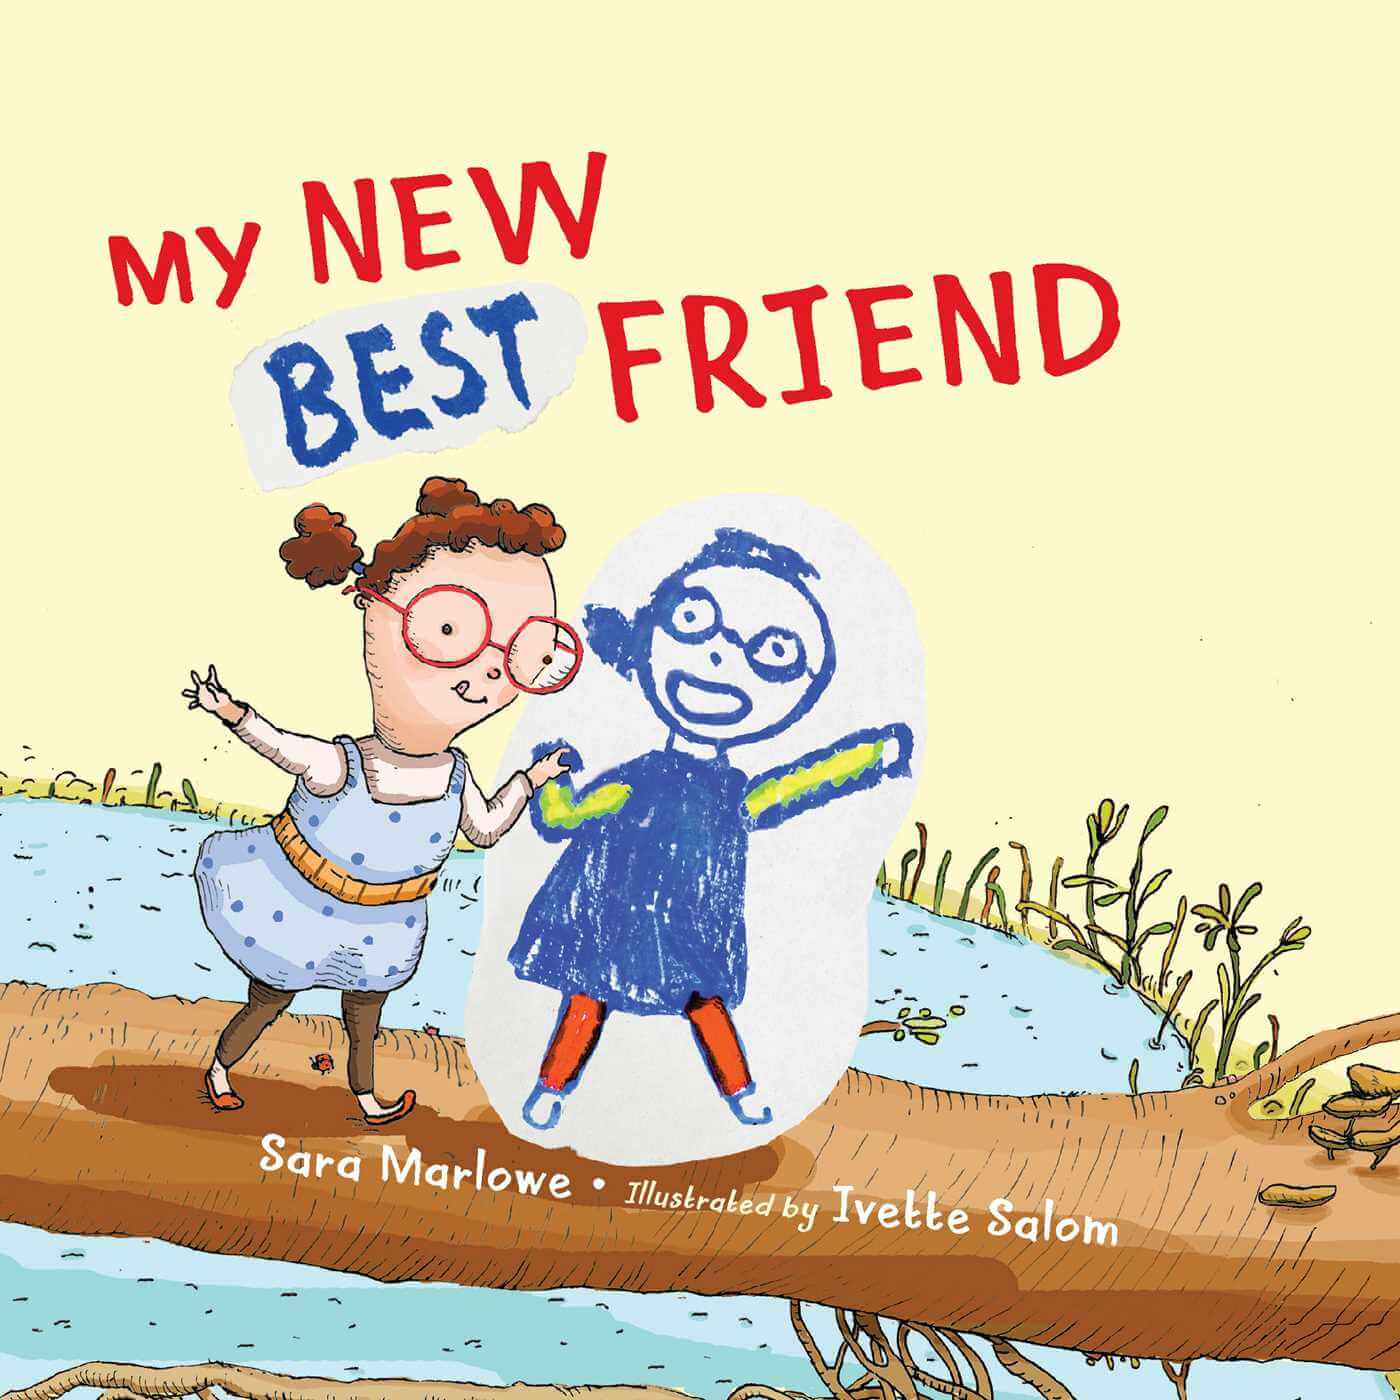 My New Best Friend by Sara Marlowe (Author) and Ivette